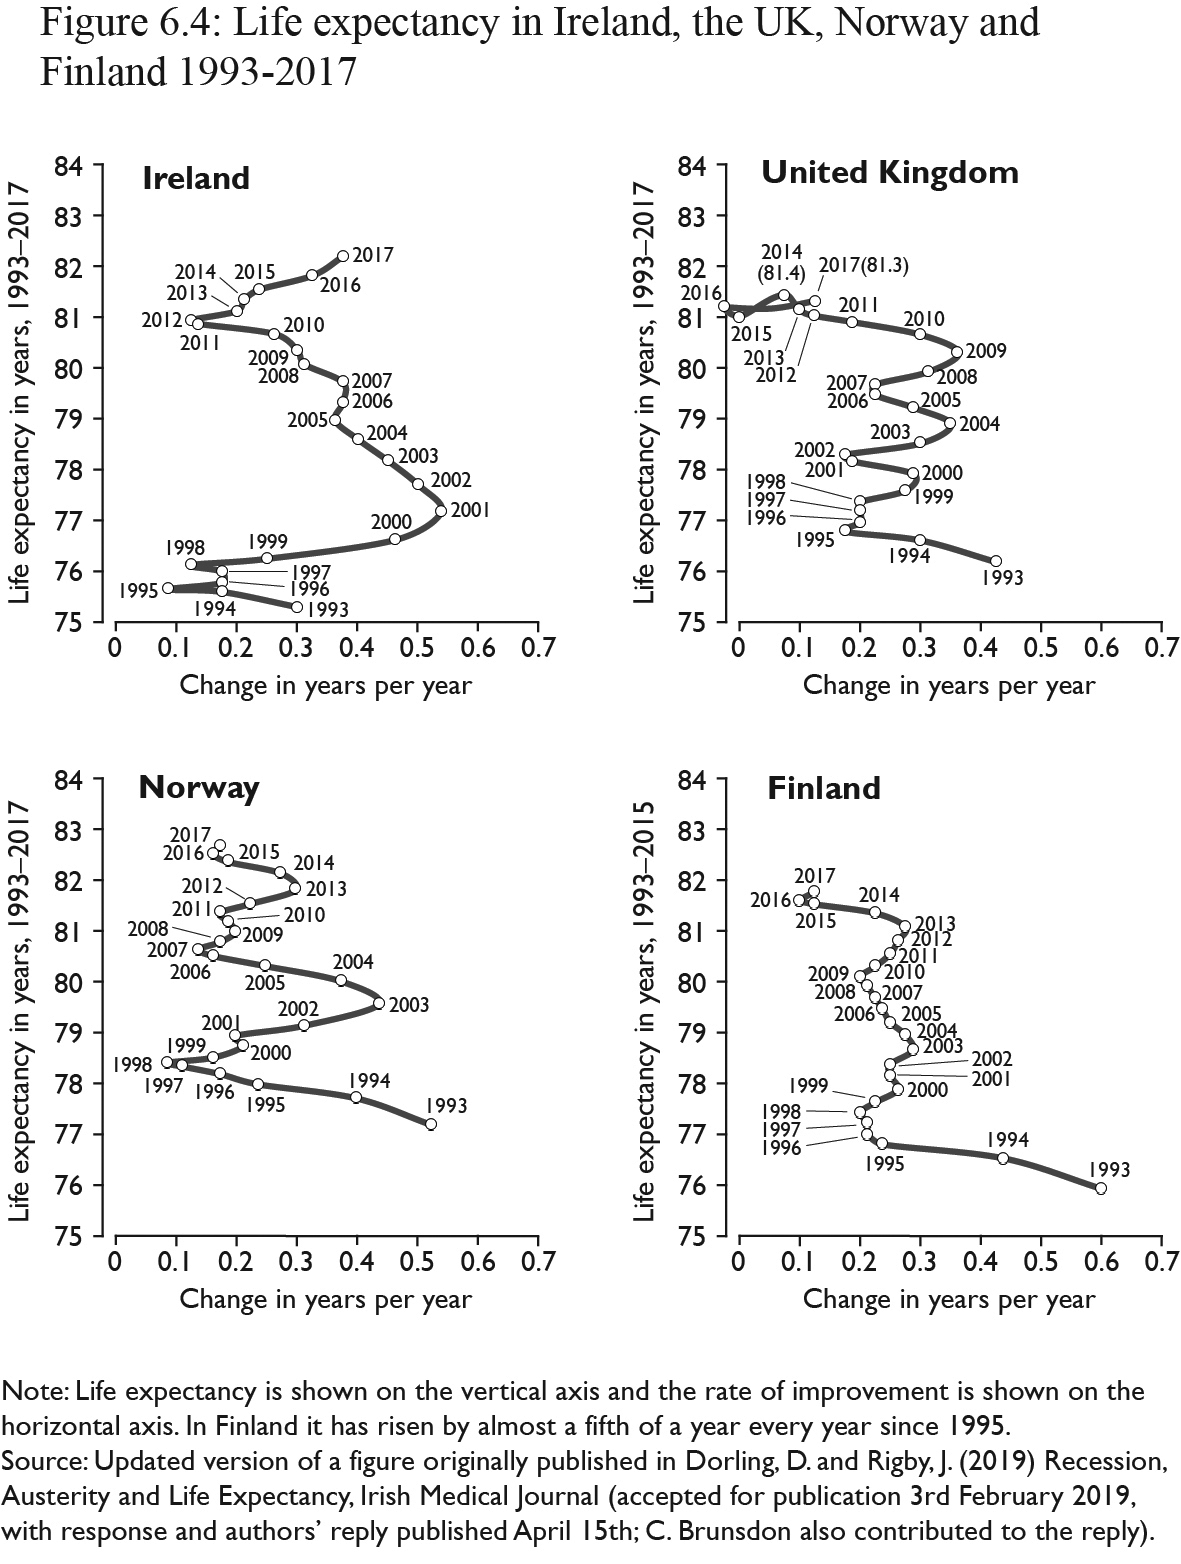 Figure 6.4: Note: life expectancy is shown on the vertical axis and the rate of improvement is shown on the horizontal axis. In Finland it has risen by almost a fifth of a year every year since 1995. Source: updated version of a figure originally published in Dorling, D. and Rigby, J. (2019) Recession, Austerity and Life Expectancy Irish Medical Journal, Accepted for publication, 3rd February with response and authors’ reply published April 15th; [C. Brunsdon also contributed to the reply]